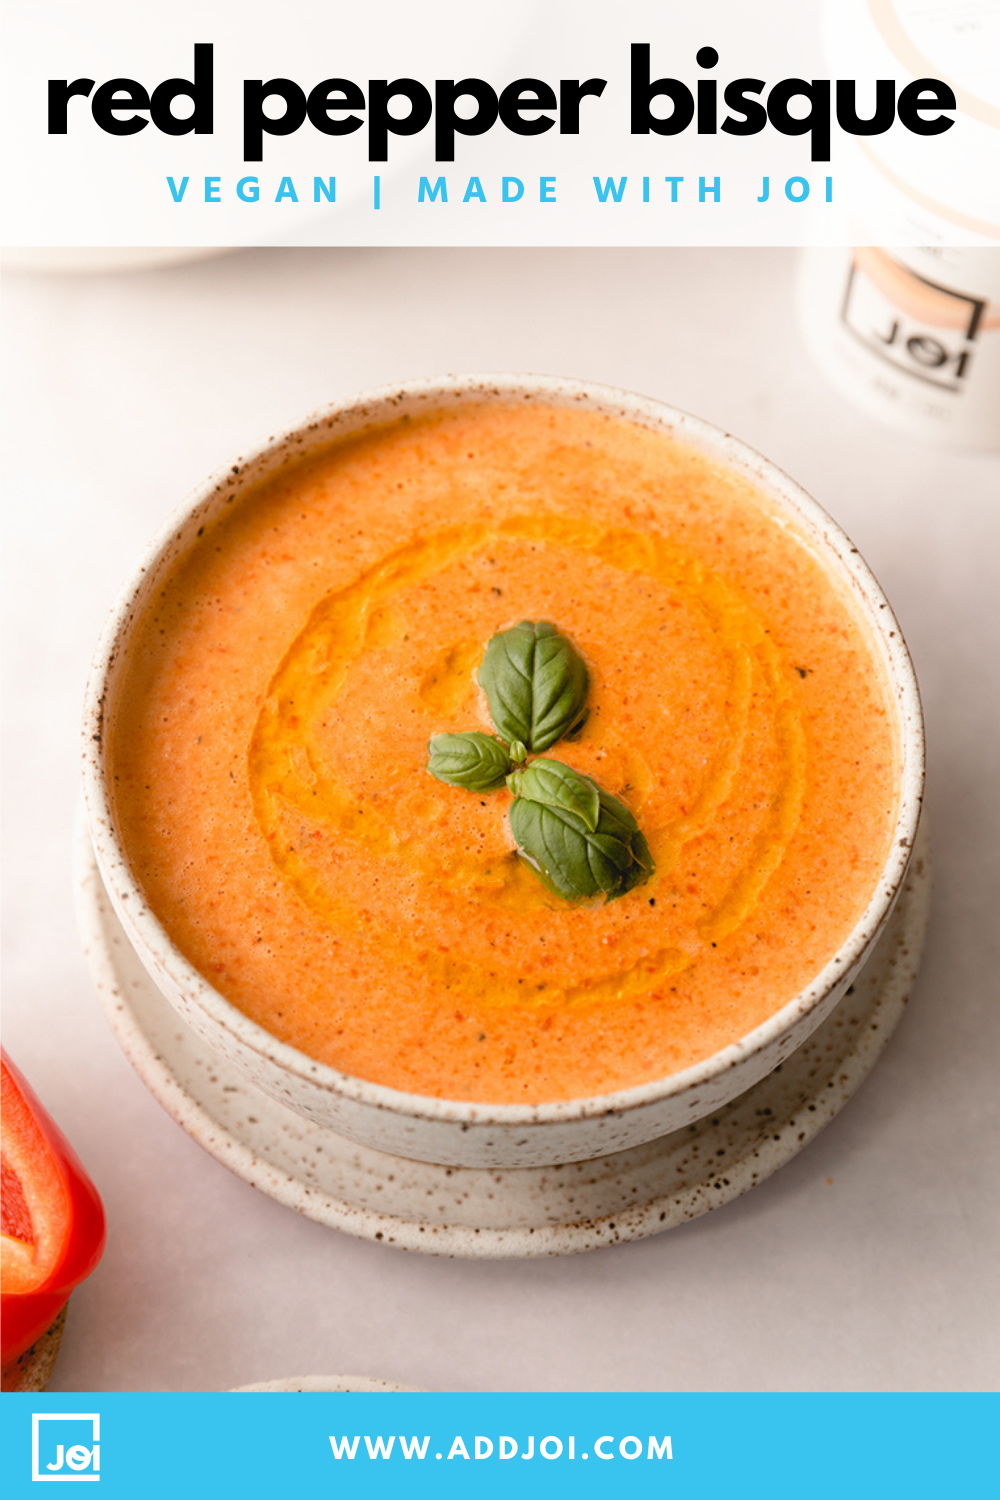 Vegan Roasted Red Pepper Bisque Made with JOI